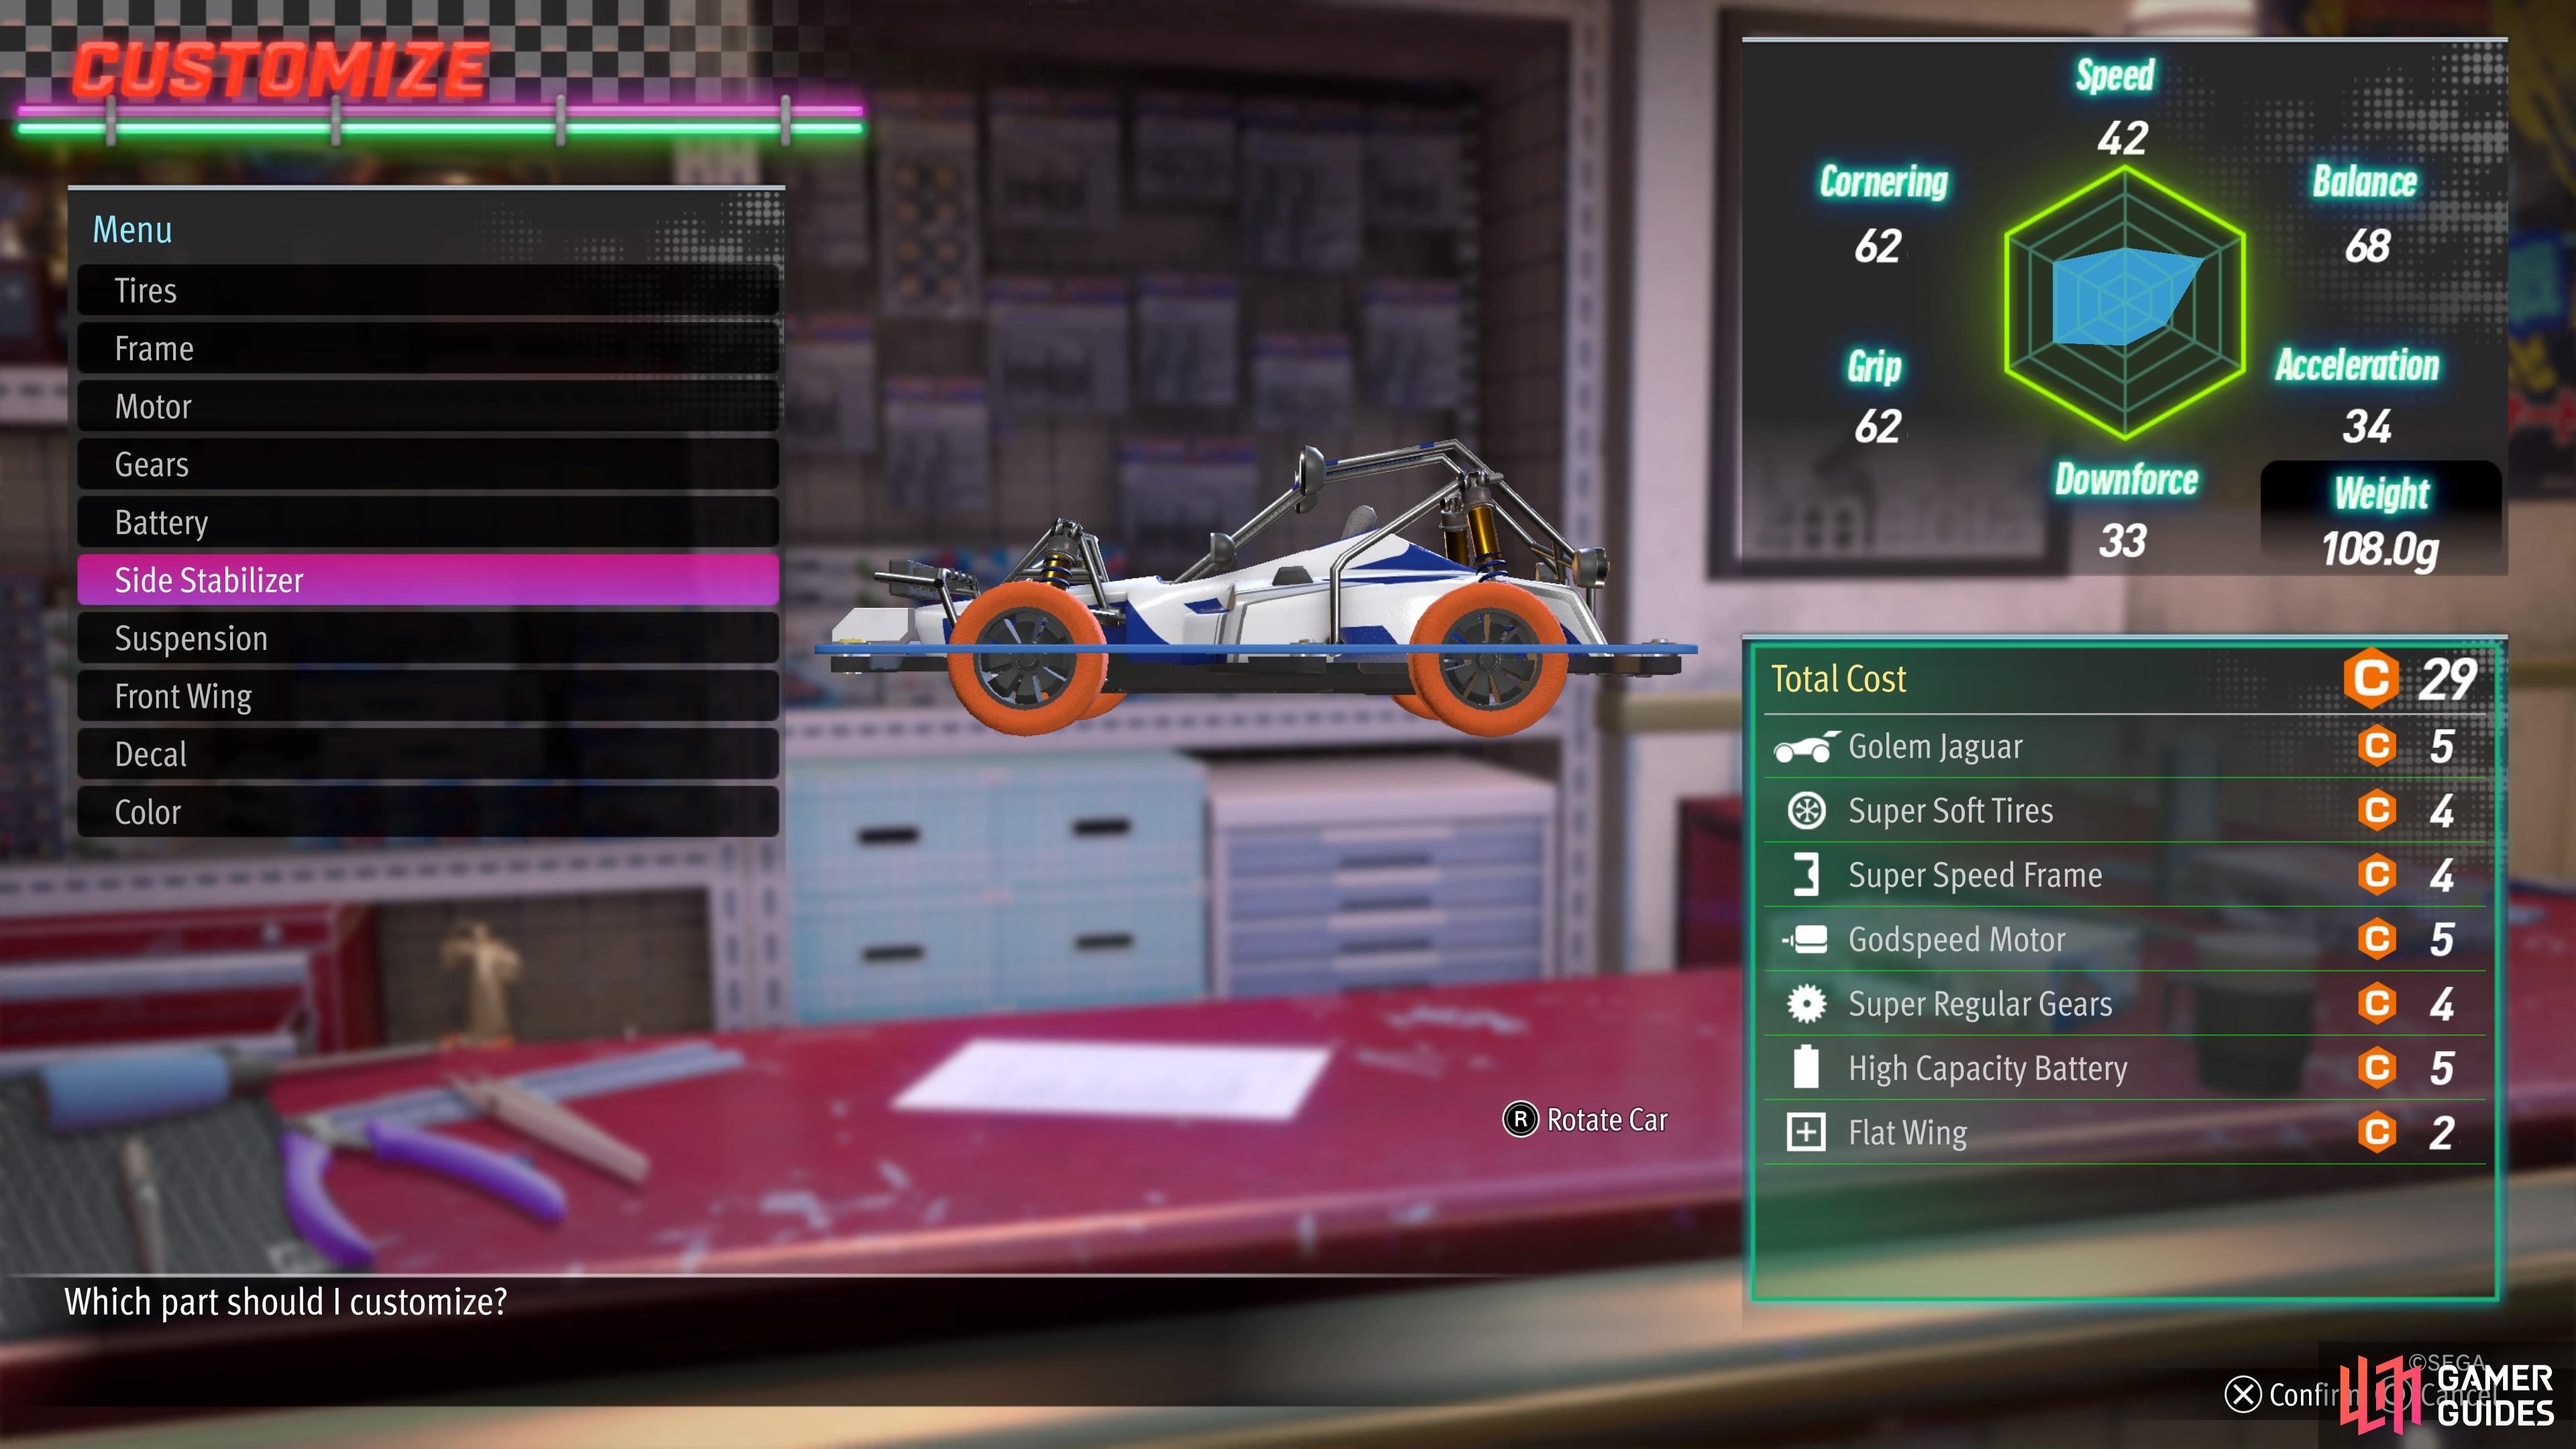 Finding the right customizations for each race is the biggest trouble with this minigame.